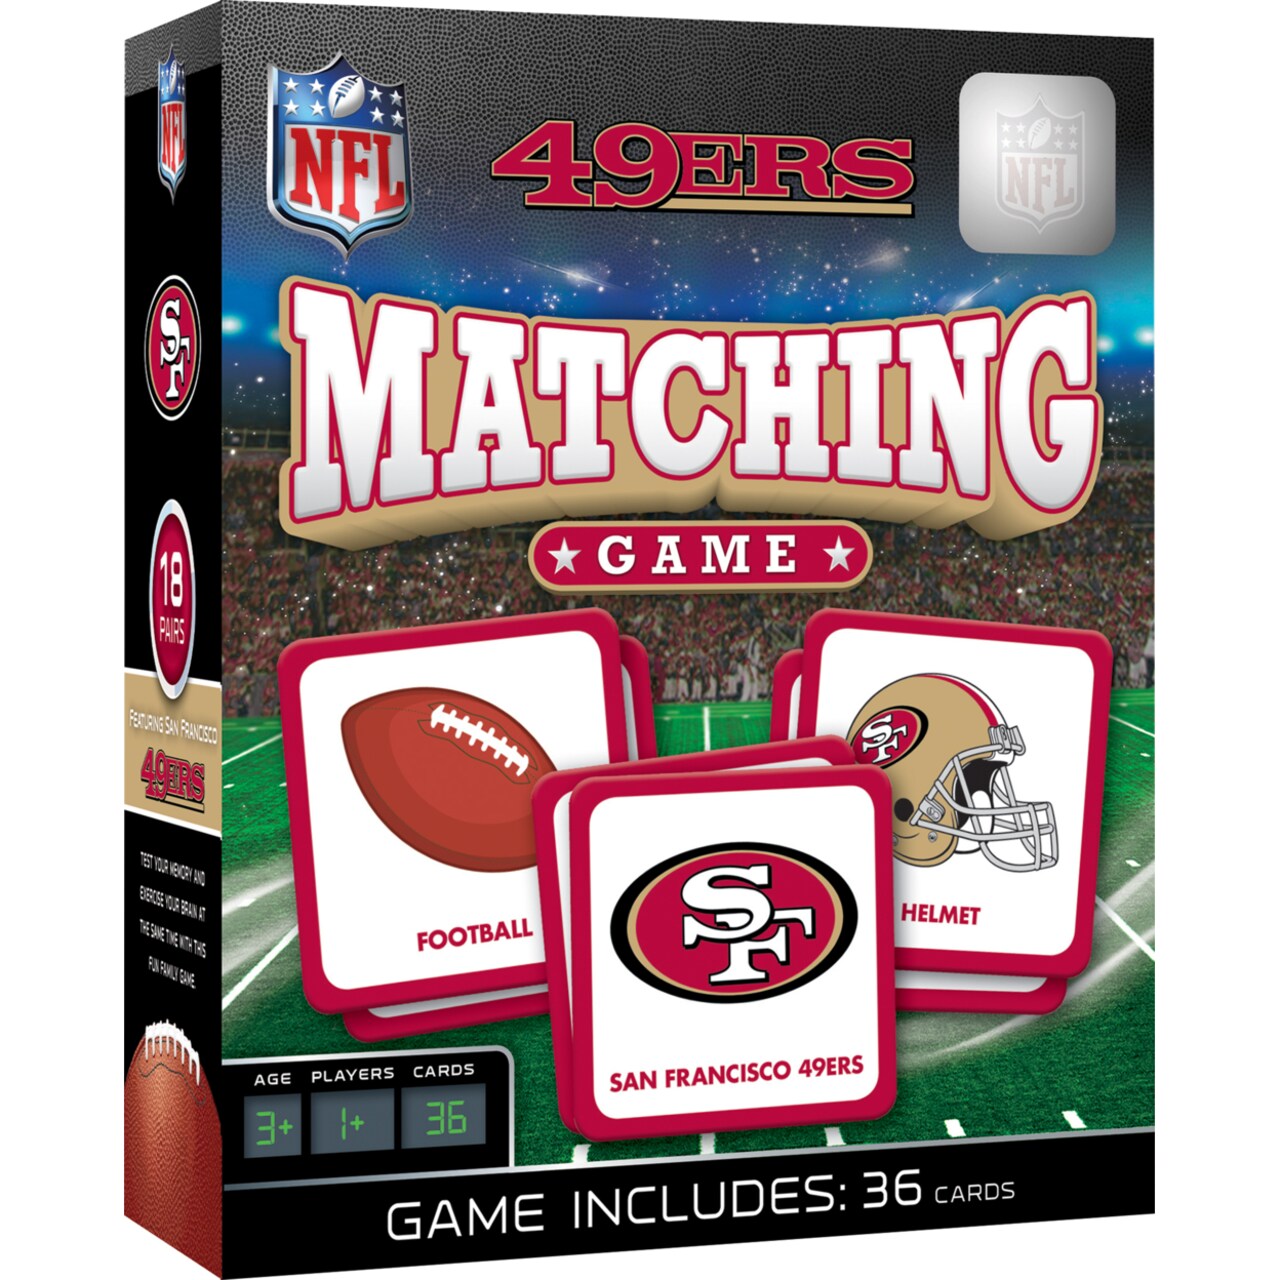 Masterpieces   Officially Licensed NFL San Francisco 49ers Matching Game for Kids and Families